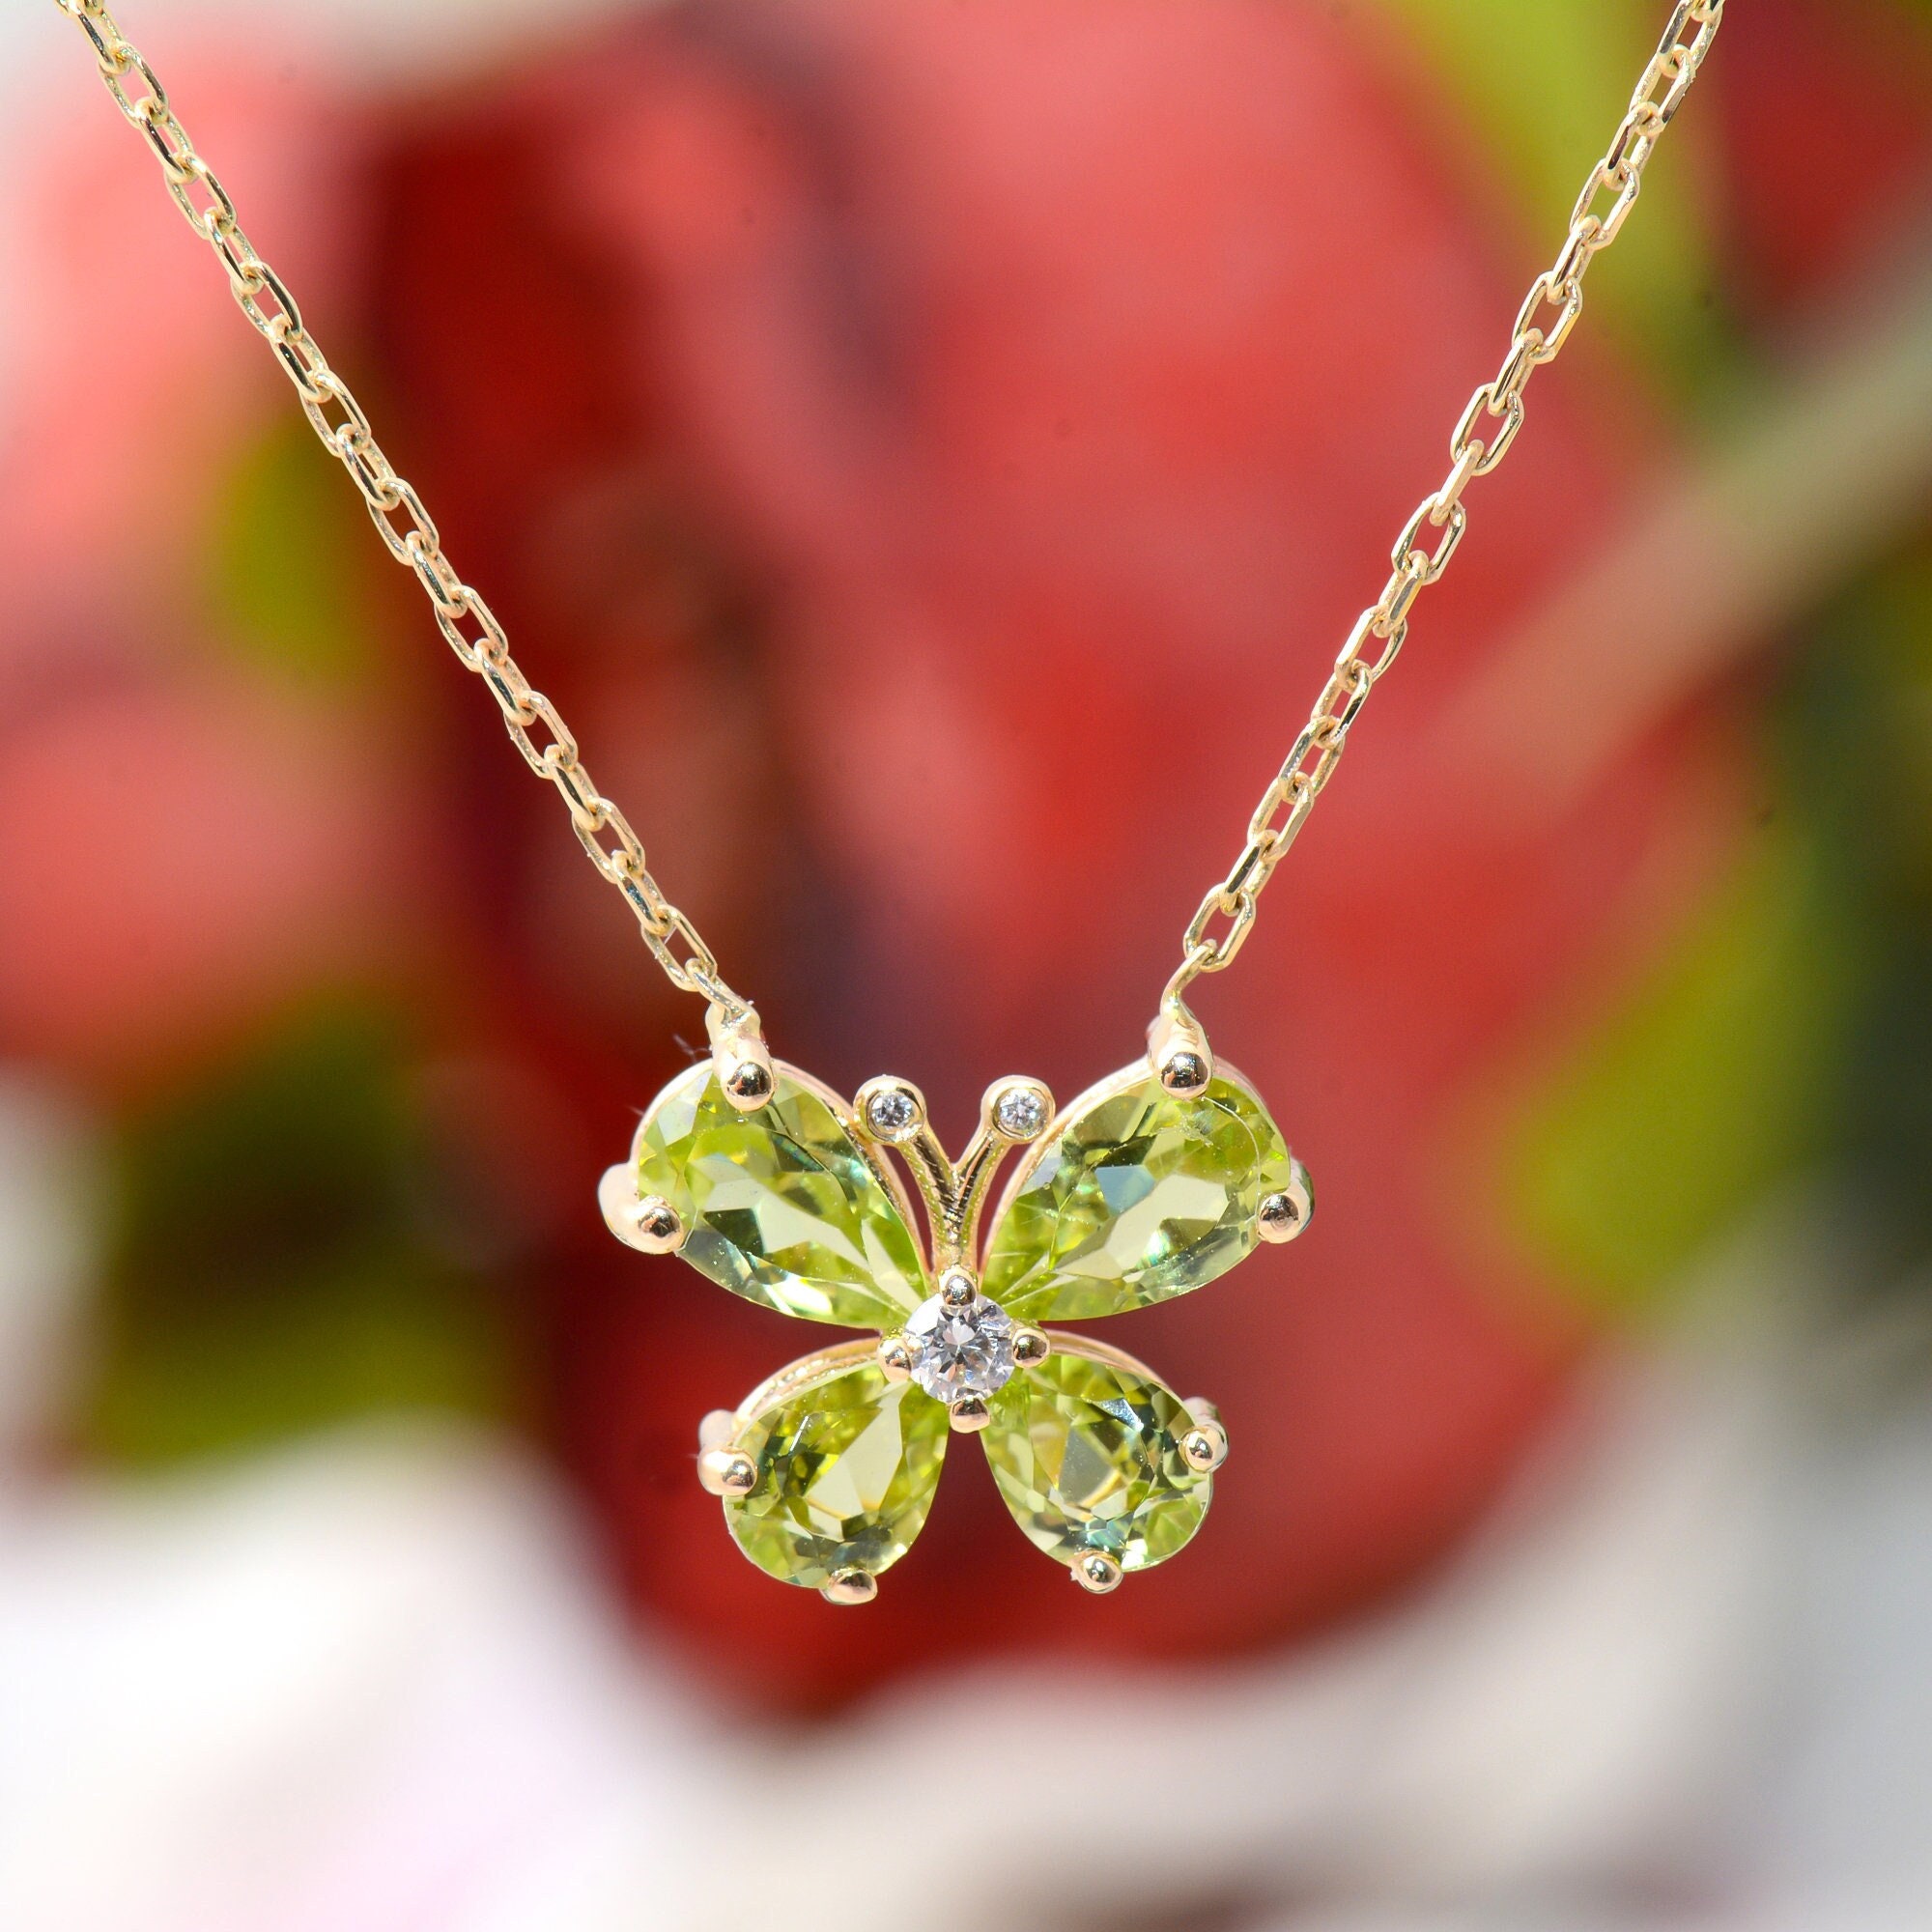 Butterfly Pendant Necklace, Sterling Silver & Peridot Stone, Handcrafted,  Designed in Cornwall UK